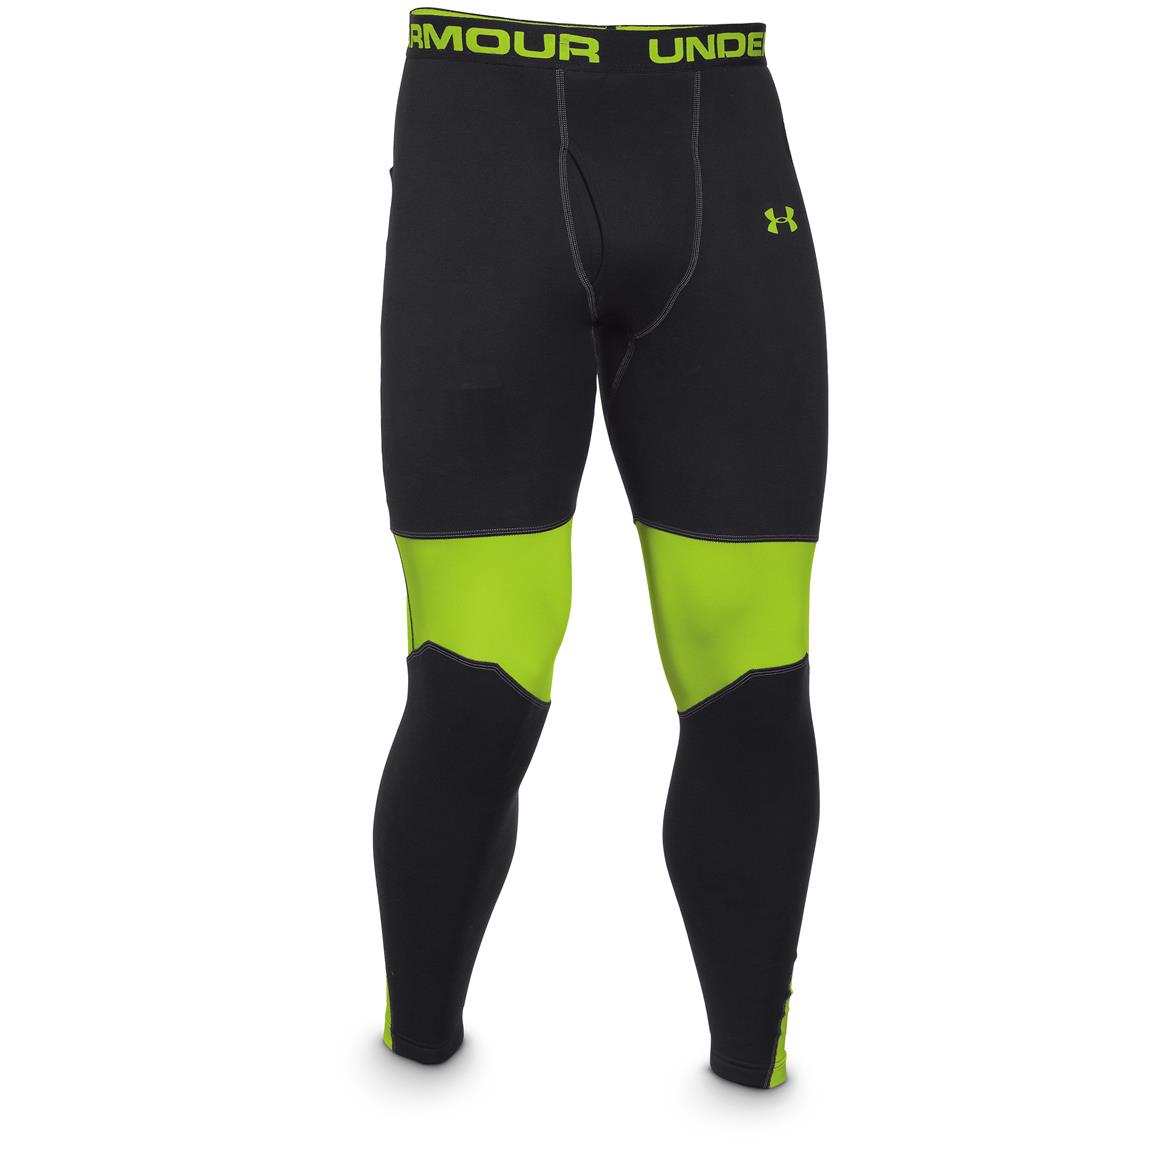 Under Armour Extreme Base Bottoms with 